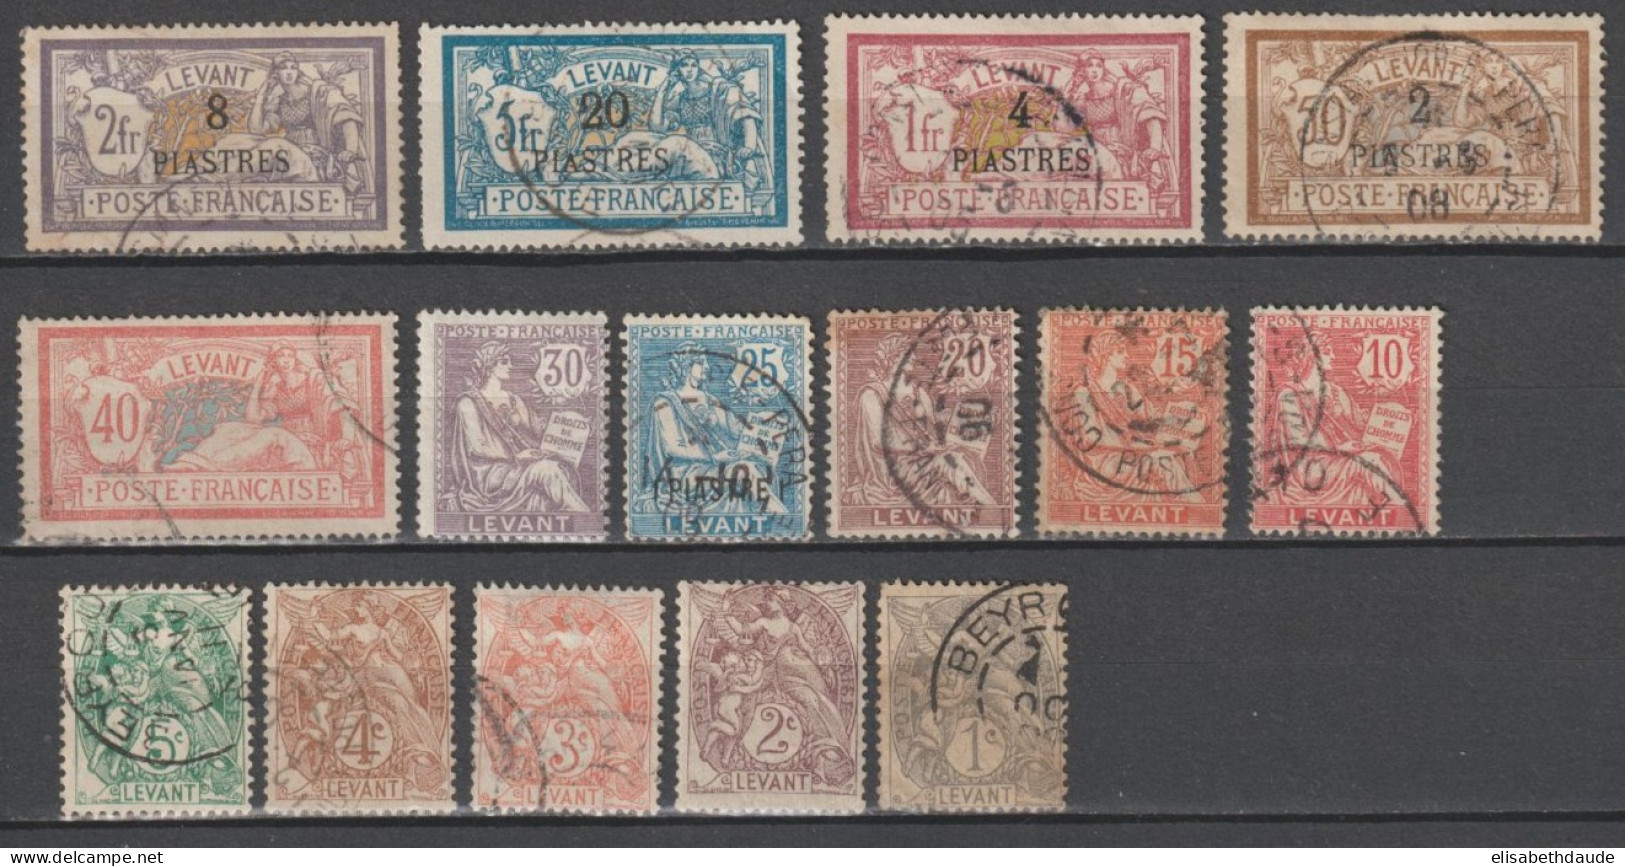 LEVANT - 1902 - SERIE COMPLETE YVERT 9/23 OBLITERE (2 TIMBRES * MH) - COTE = 57 EUR - Gebraucht